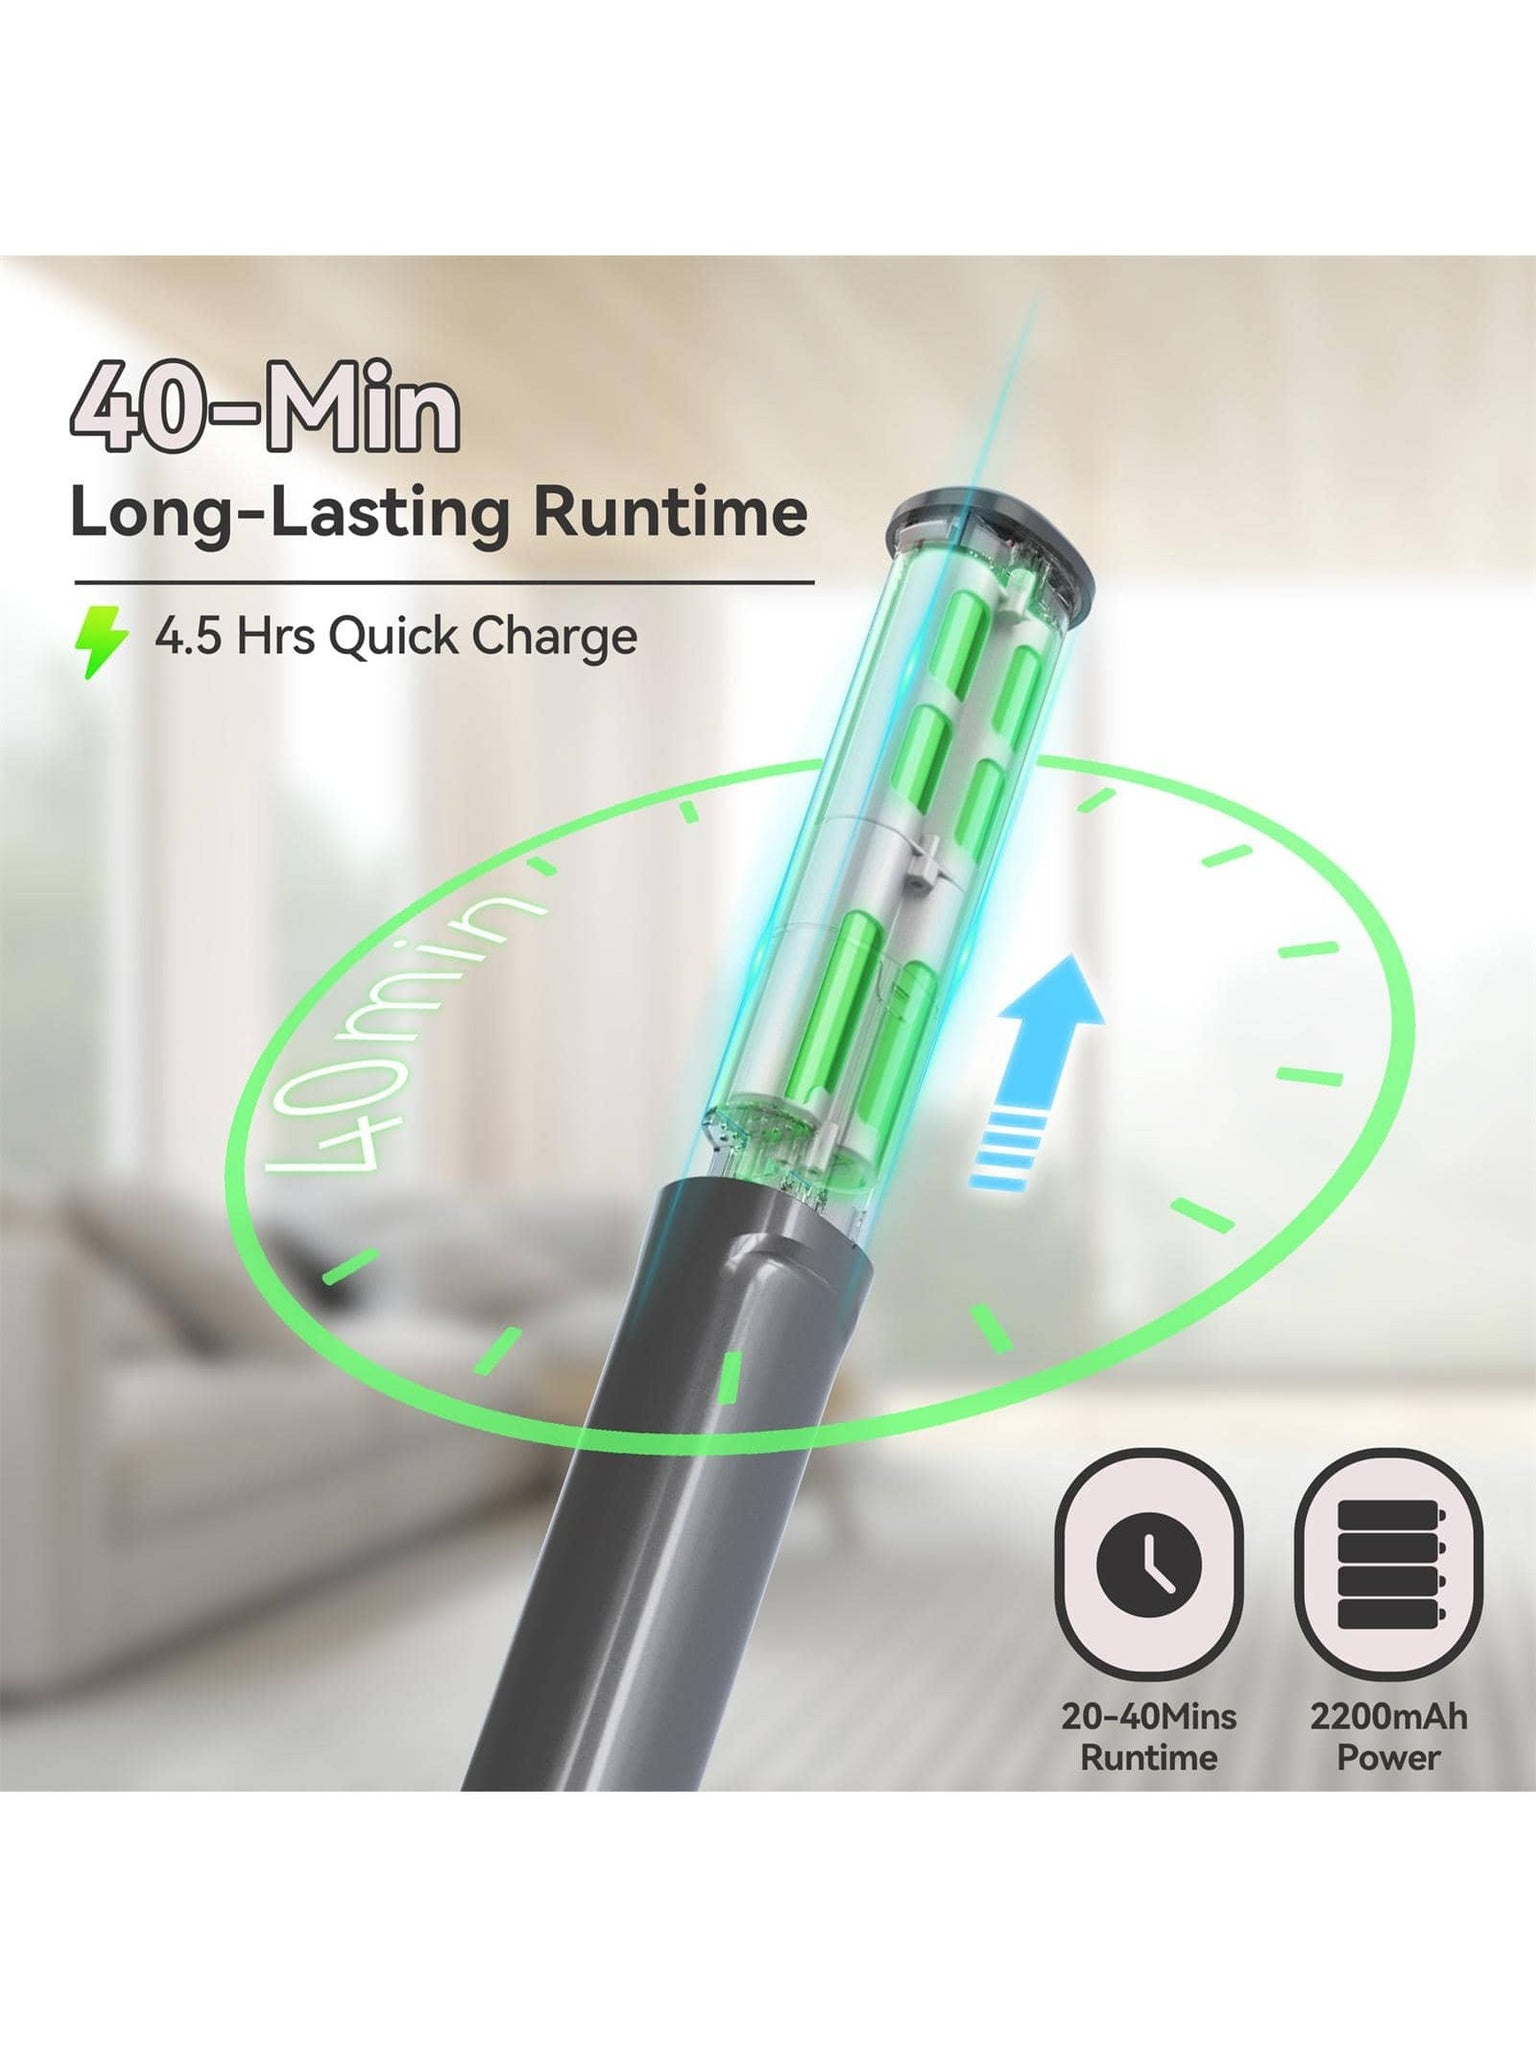 Umlo V101 Omni-directional Cordless Vacuum, Directional Soft Roller Cleaner Head, 20Kpa Power Suction Lightweight Stick Vacuum, Up to 40 Runtime for Pet Hair Hard Floor